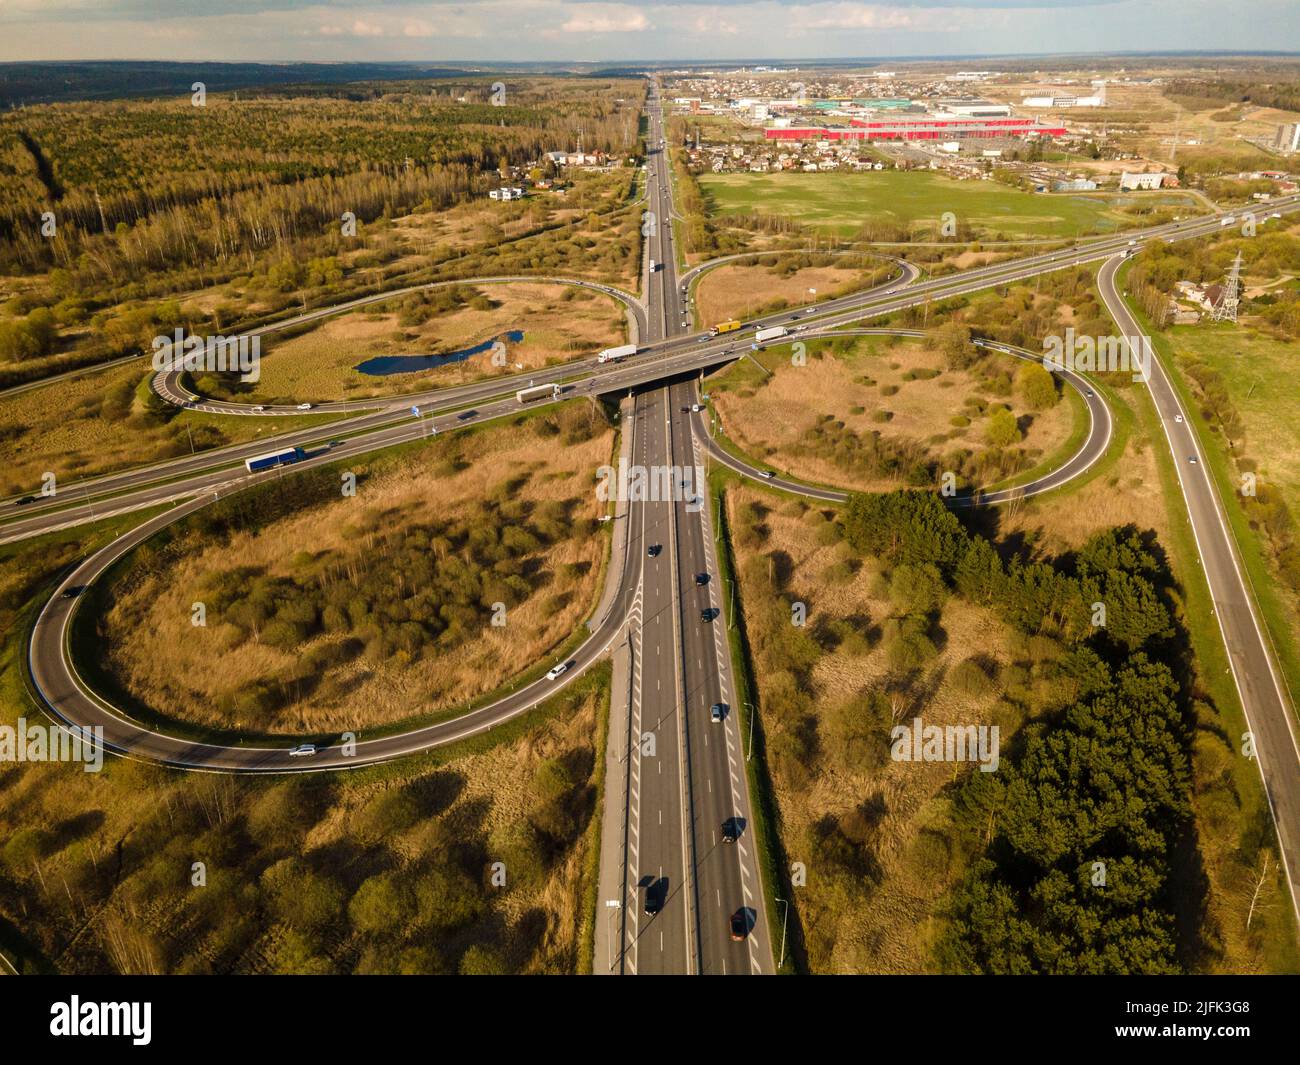 A bird's eye view of clover leaf transport intersection in Kaunas, Lithuania Stock Photo